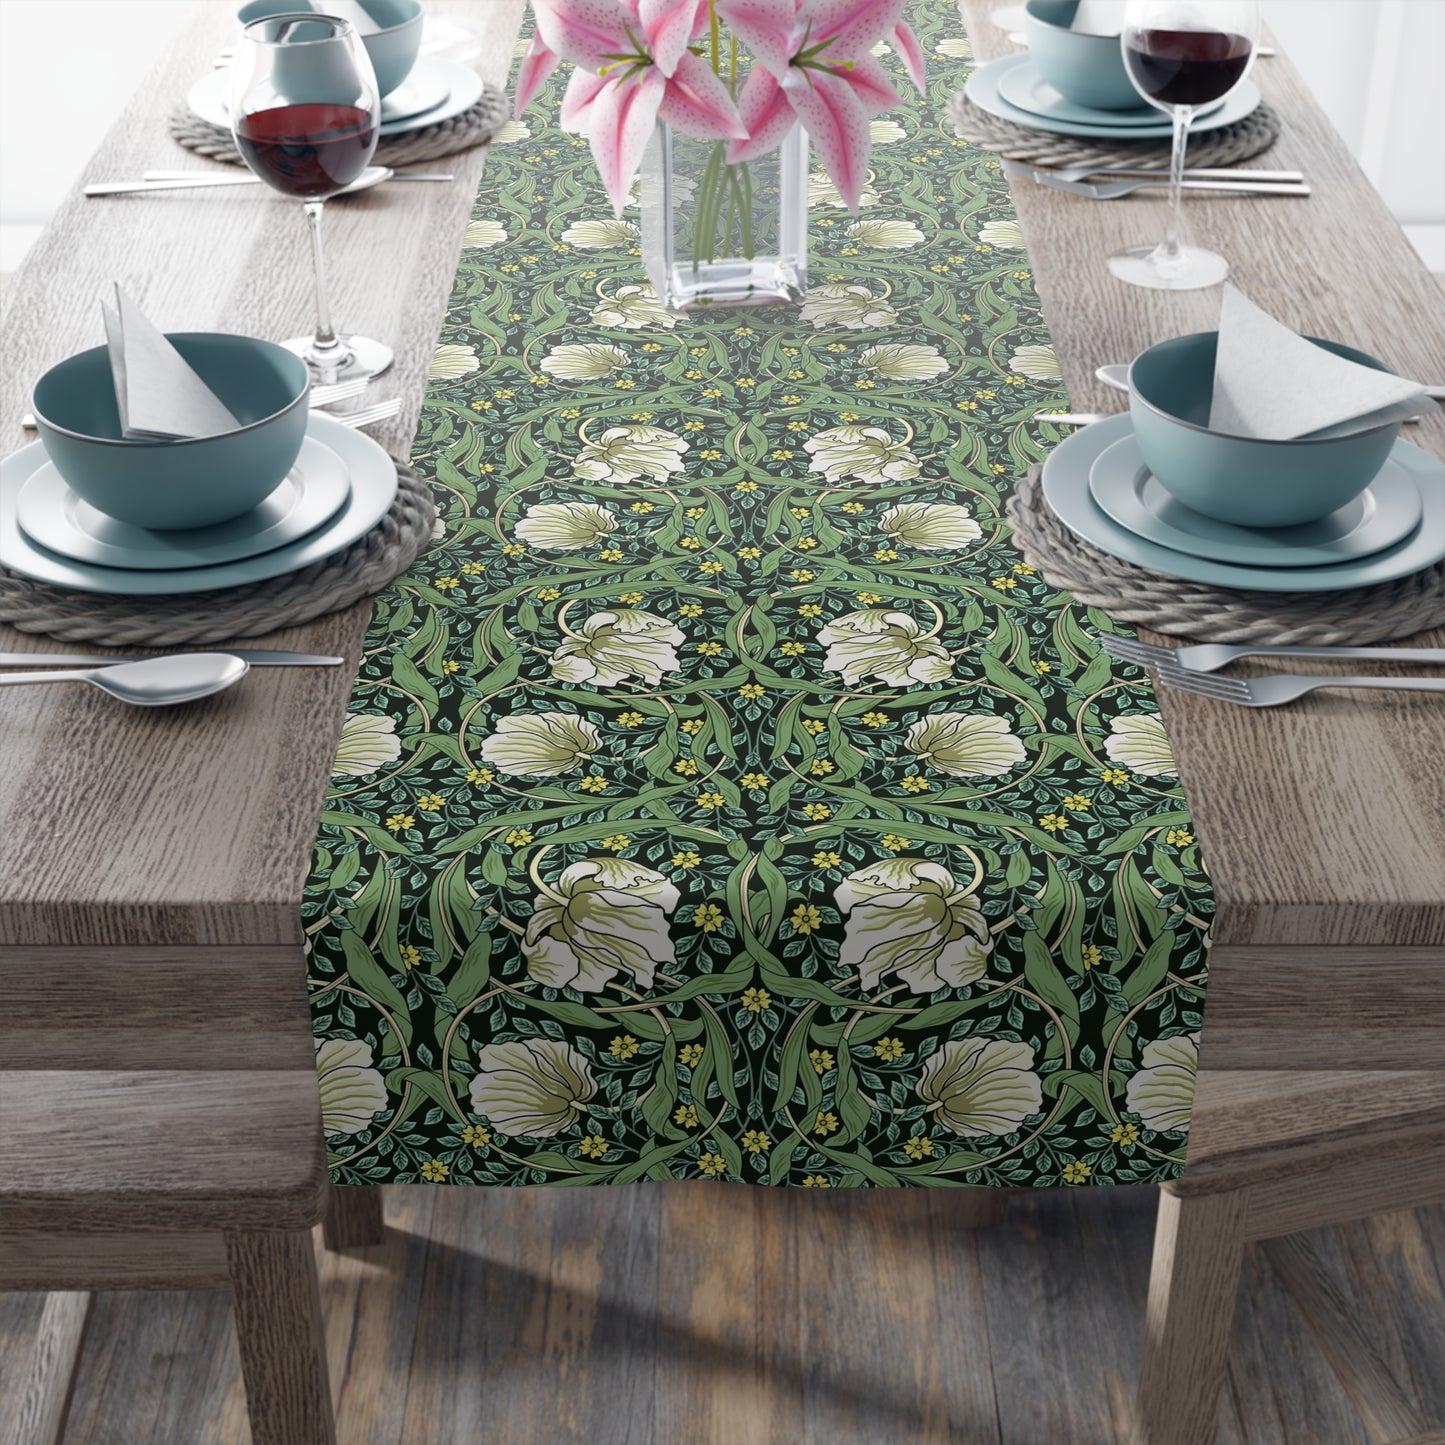 william-morris-co-table-runner-pimpernel-collection-green-8